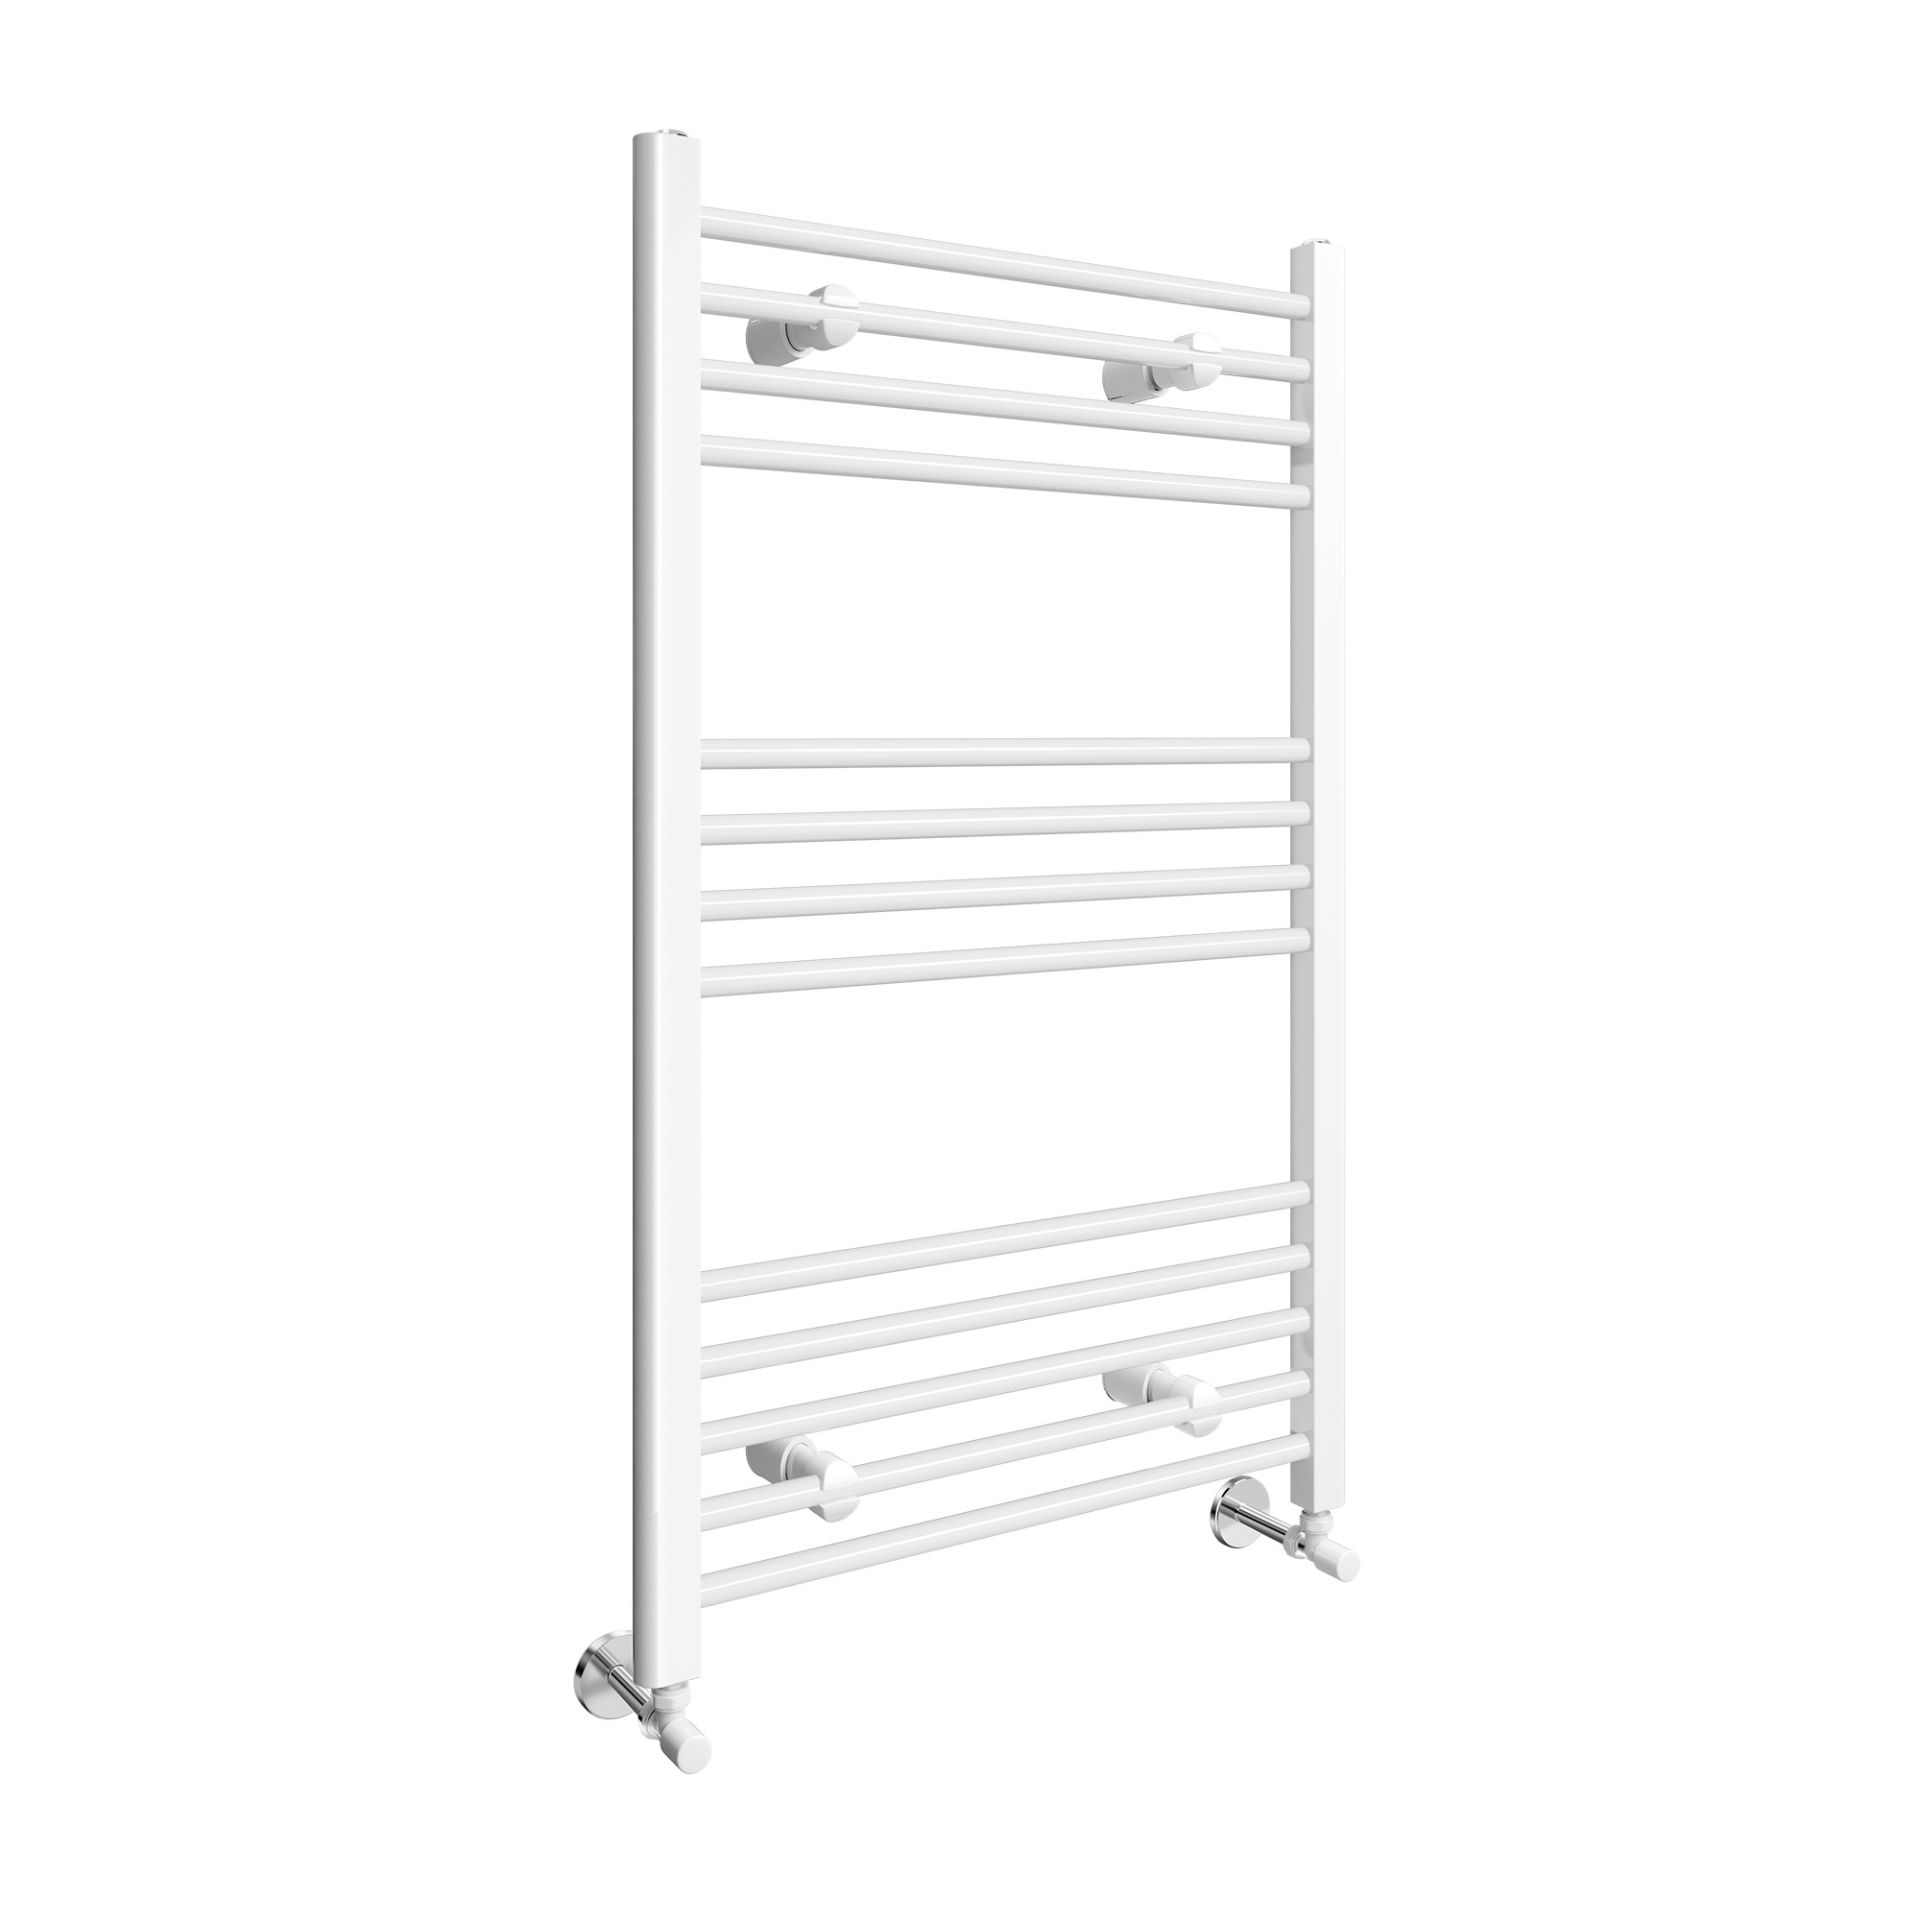 AA127- 1000x600mm White Straight Rail Ladder Towel Radiator - Polar Basic Offering durability and - Image 3 of 7